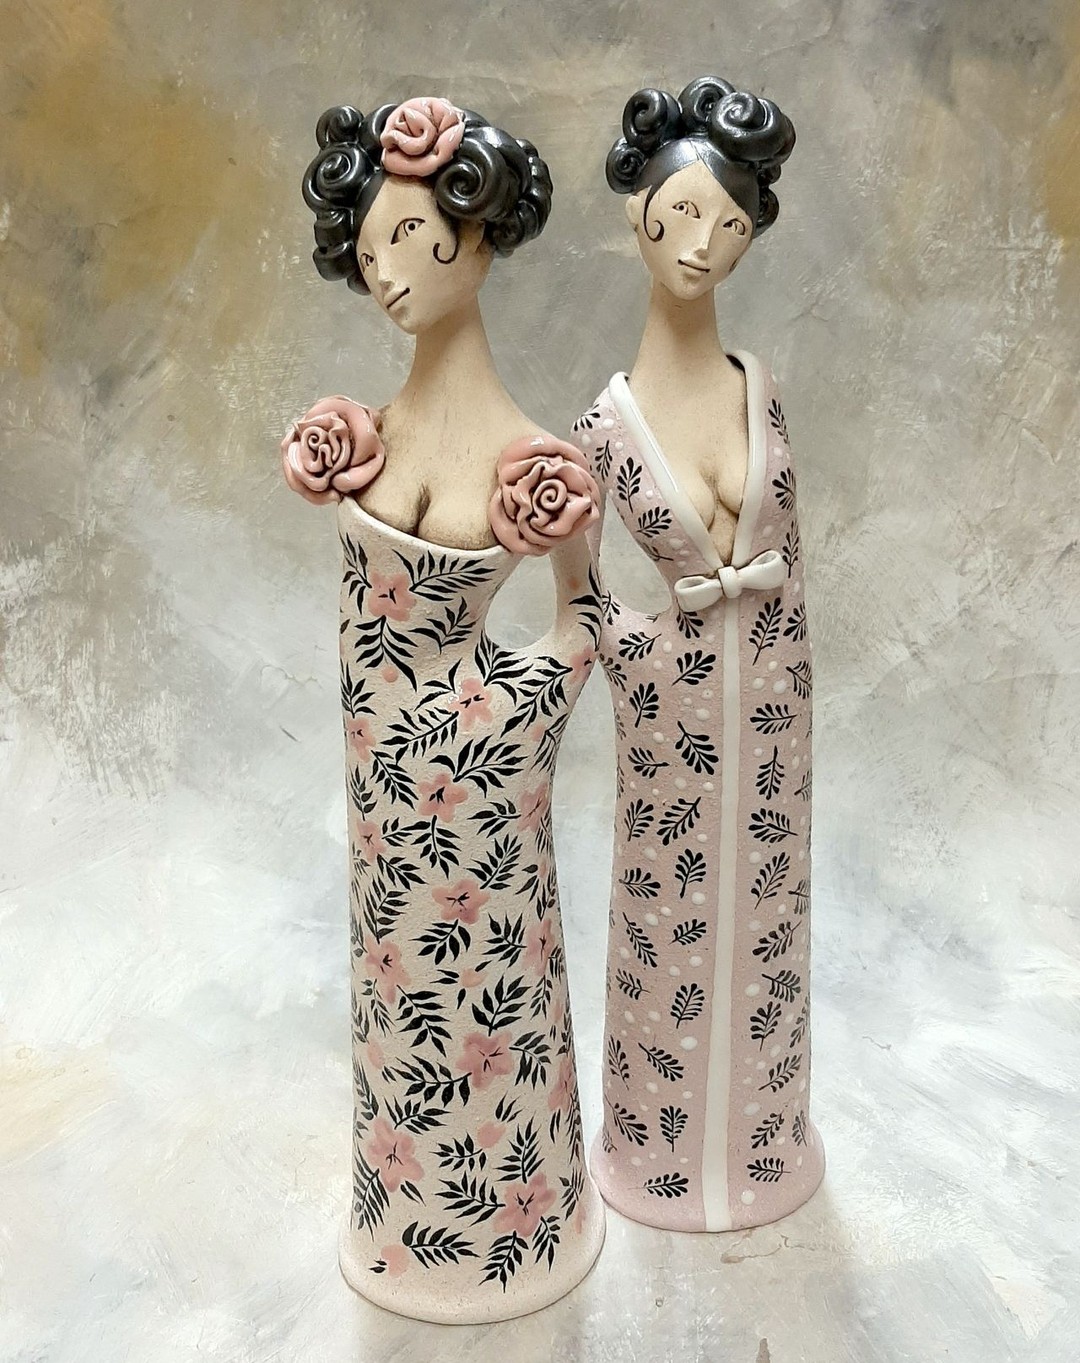 Gorgeous Female Ceramic Sculptures By Katerina B (6)